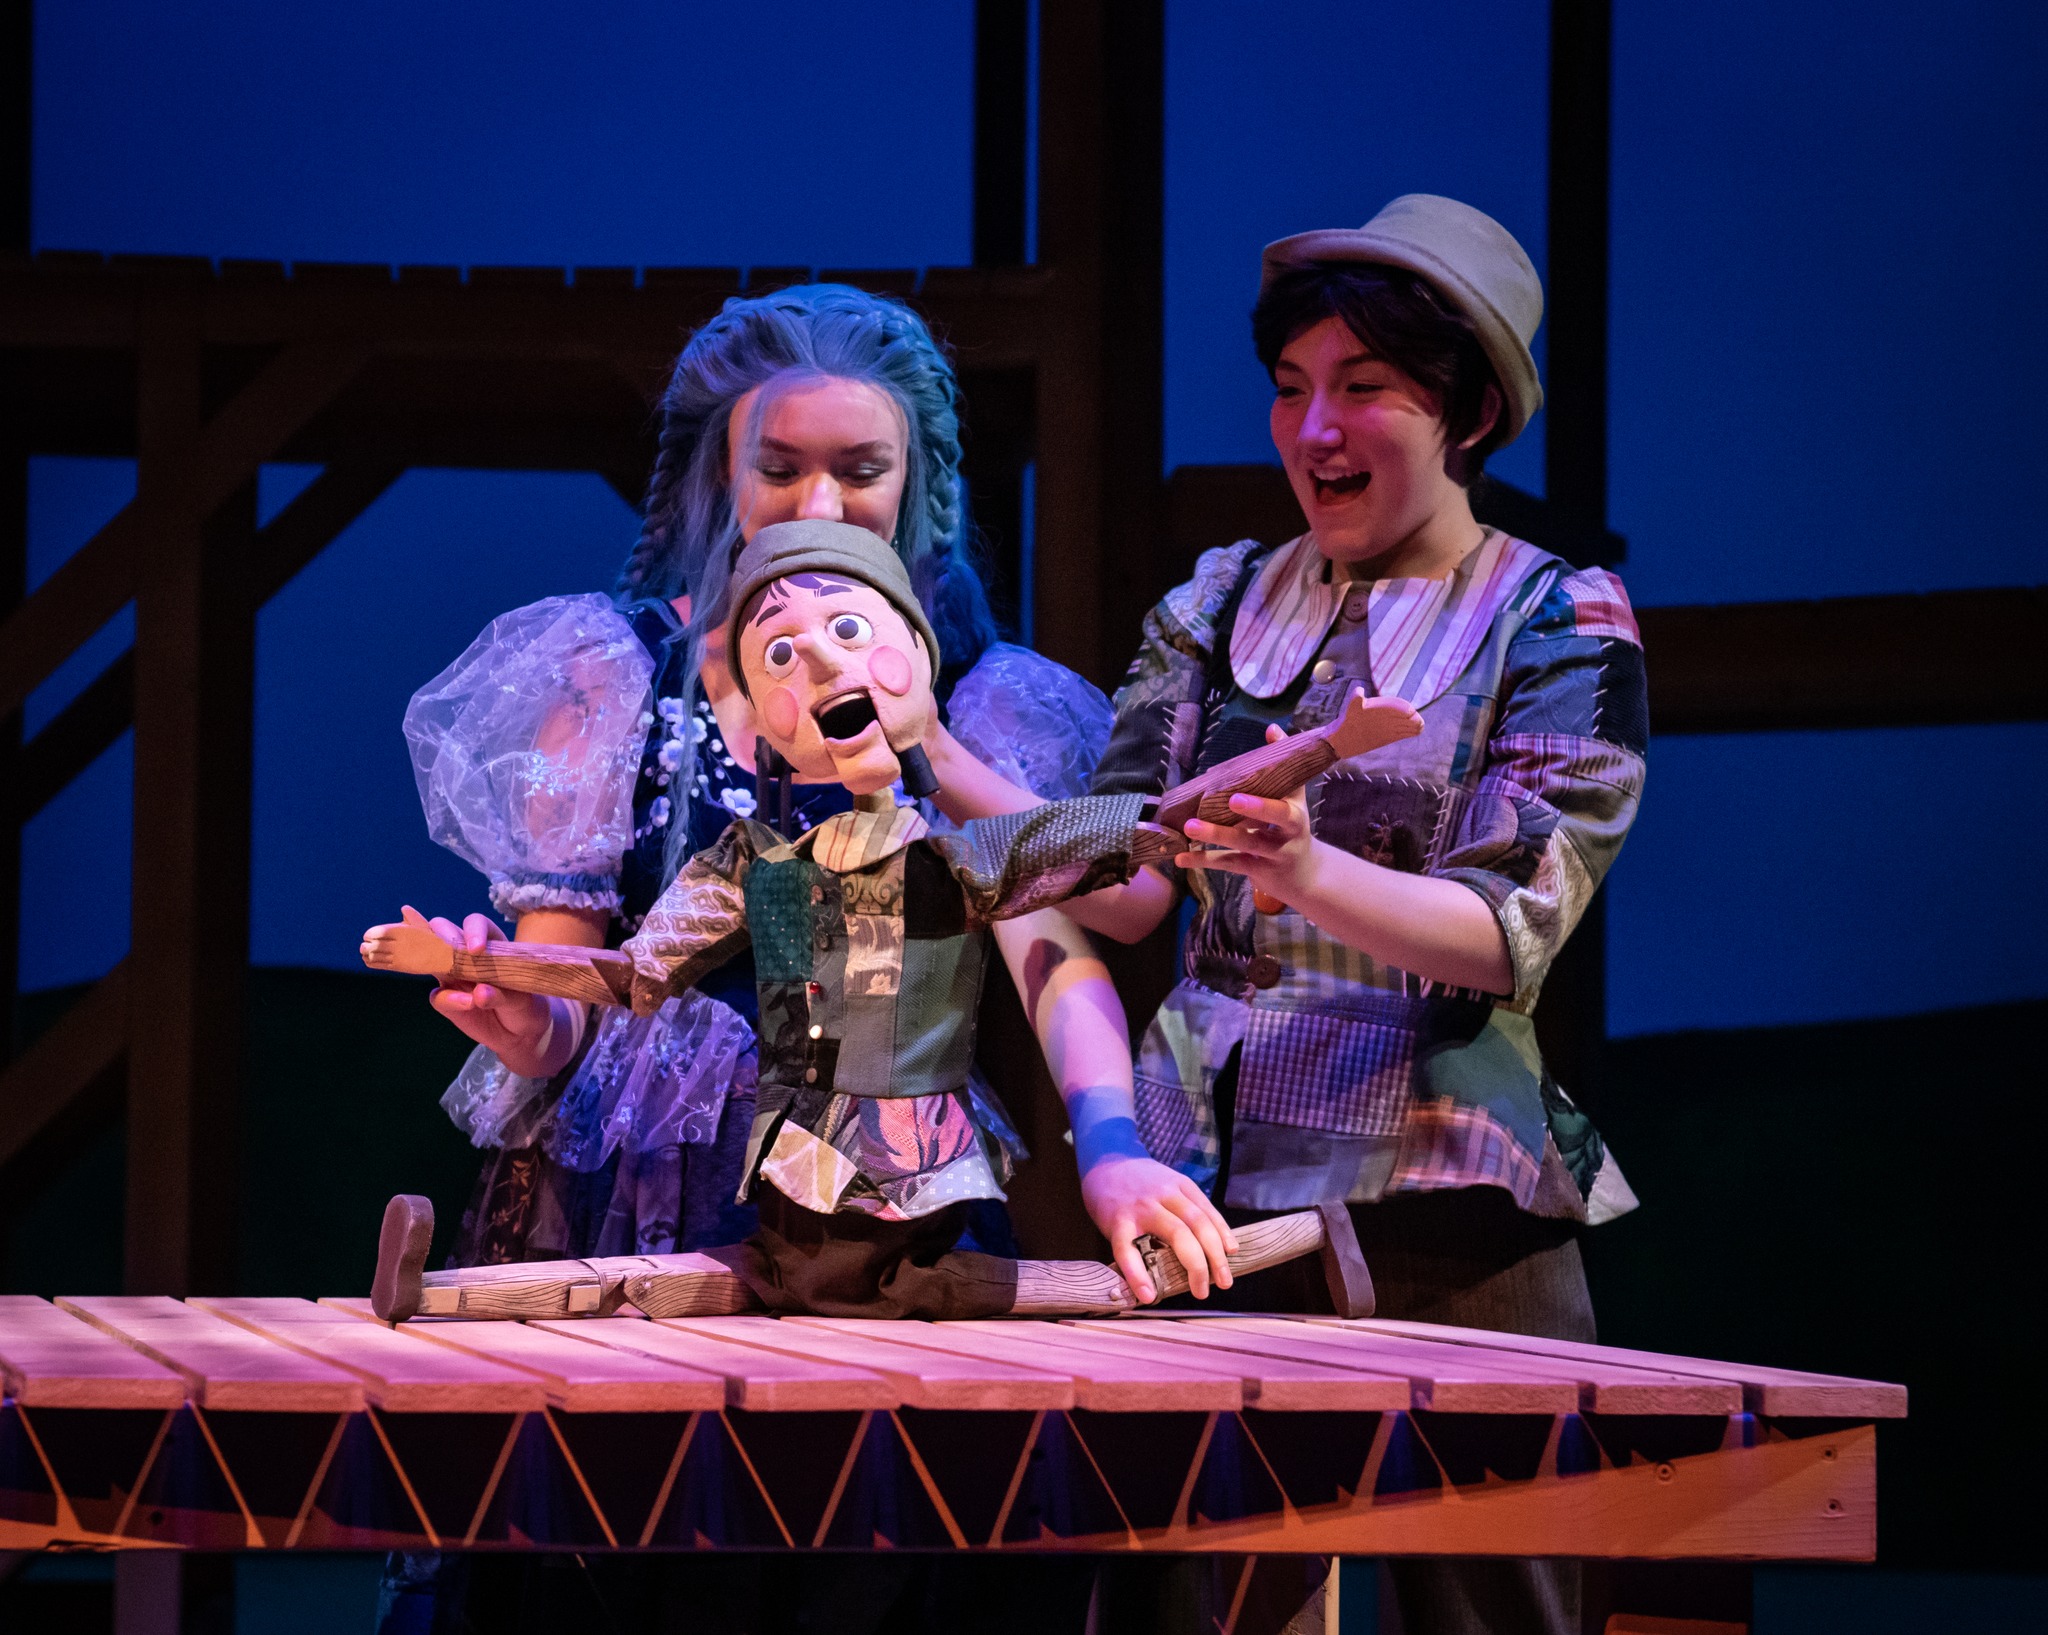 “The Adventures of Pinocchio” Review by Ruth Kennedy